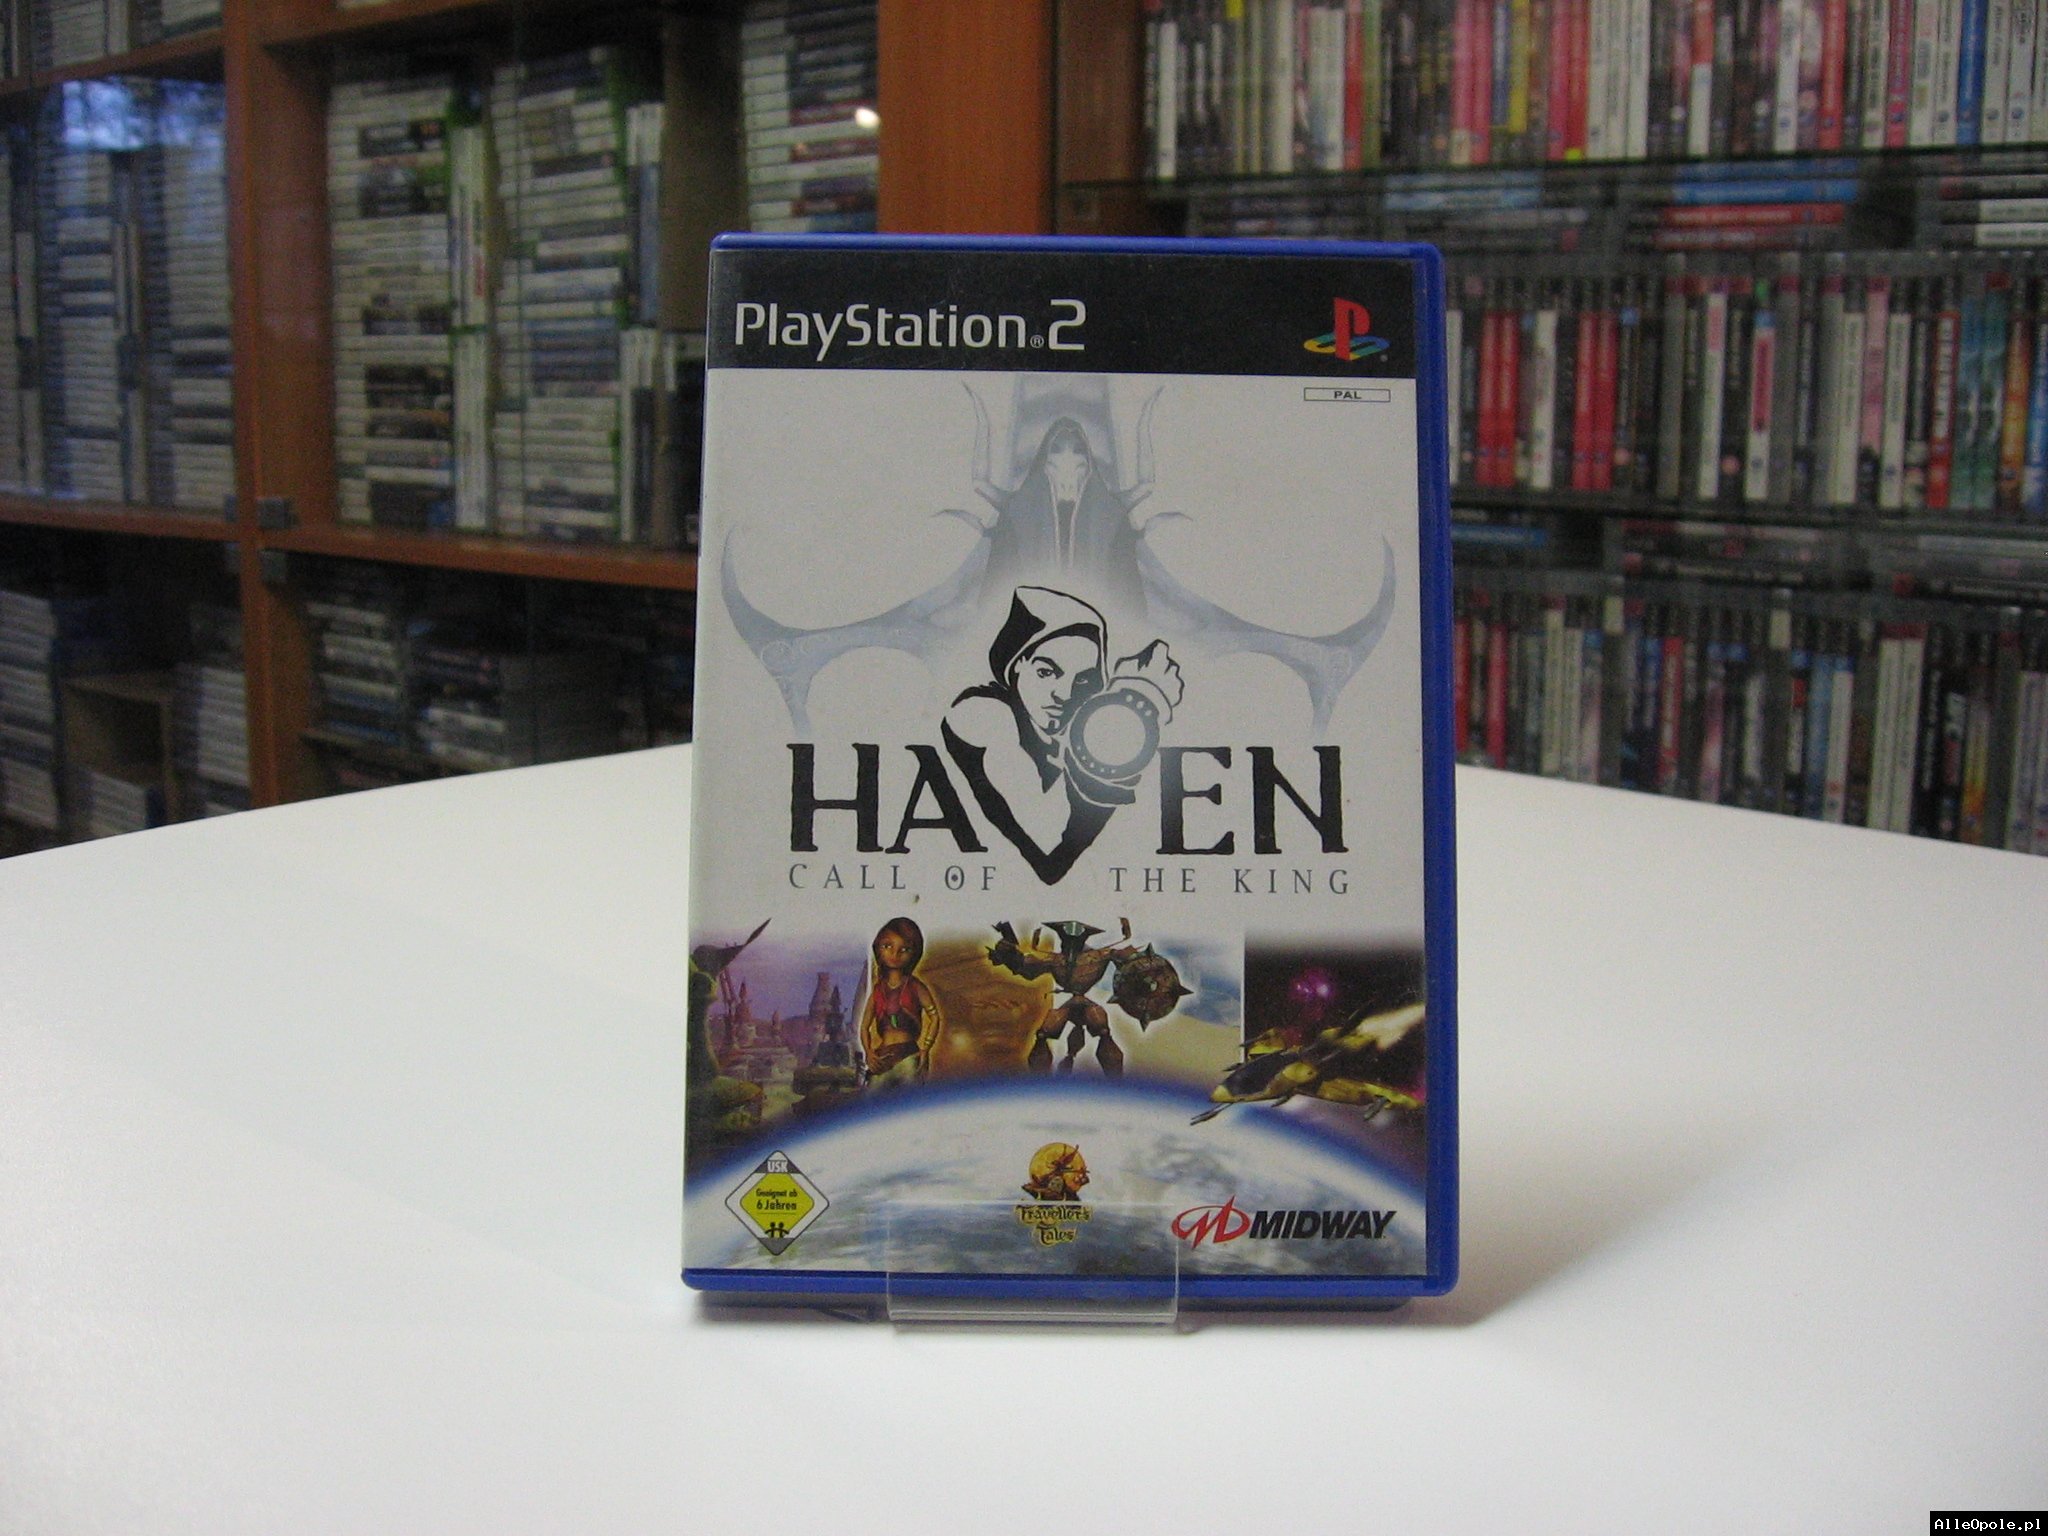 HAVEN CALL OF THE KING - GRA Ps2 - Opole 0602